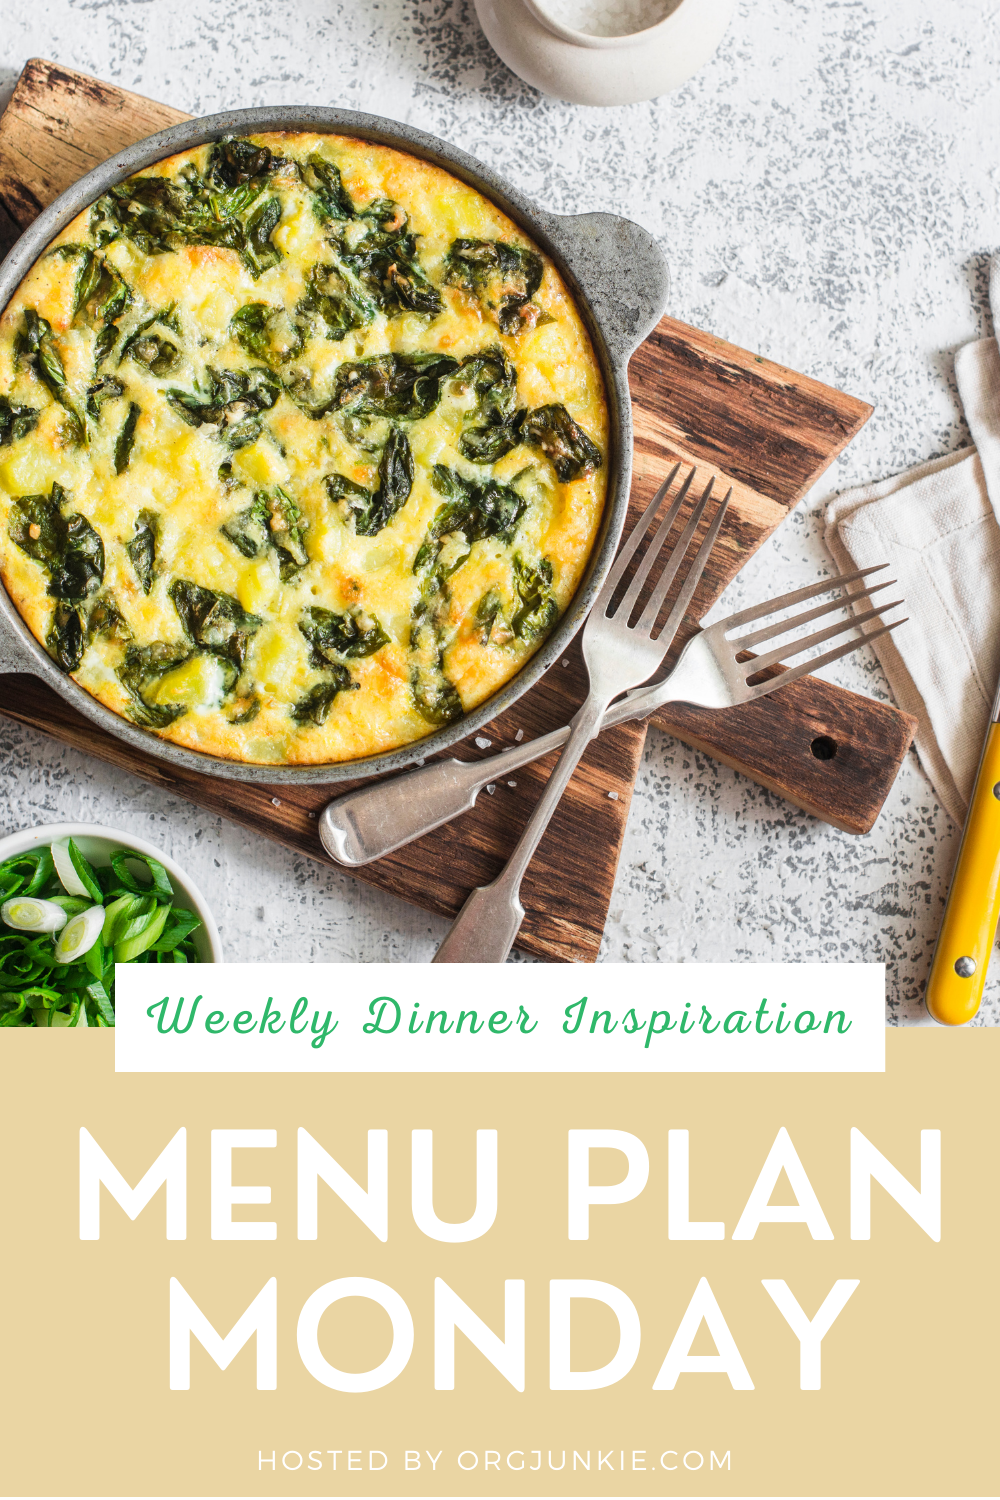 Menu Plan Monday for the week of March 29/21. Weekly Dinner Inspiration at I'm an Organizing Junkie